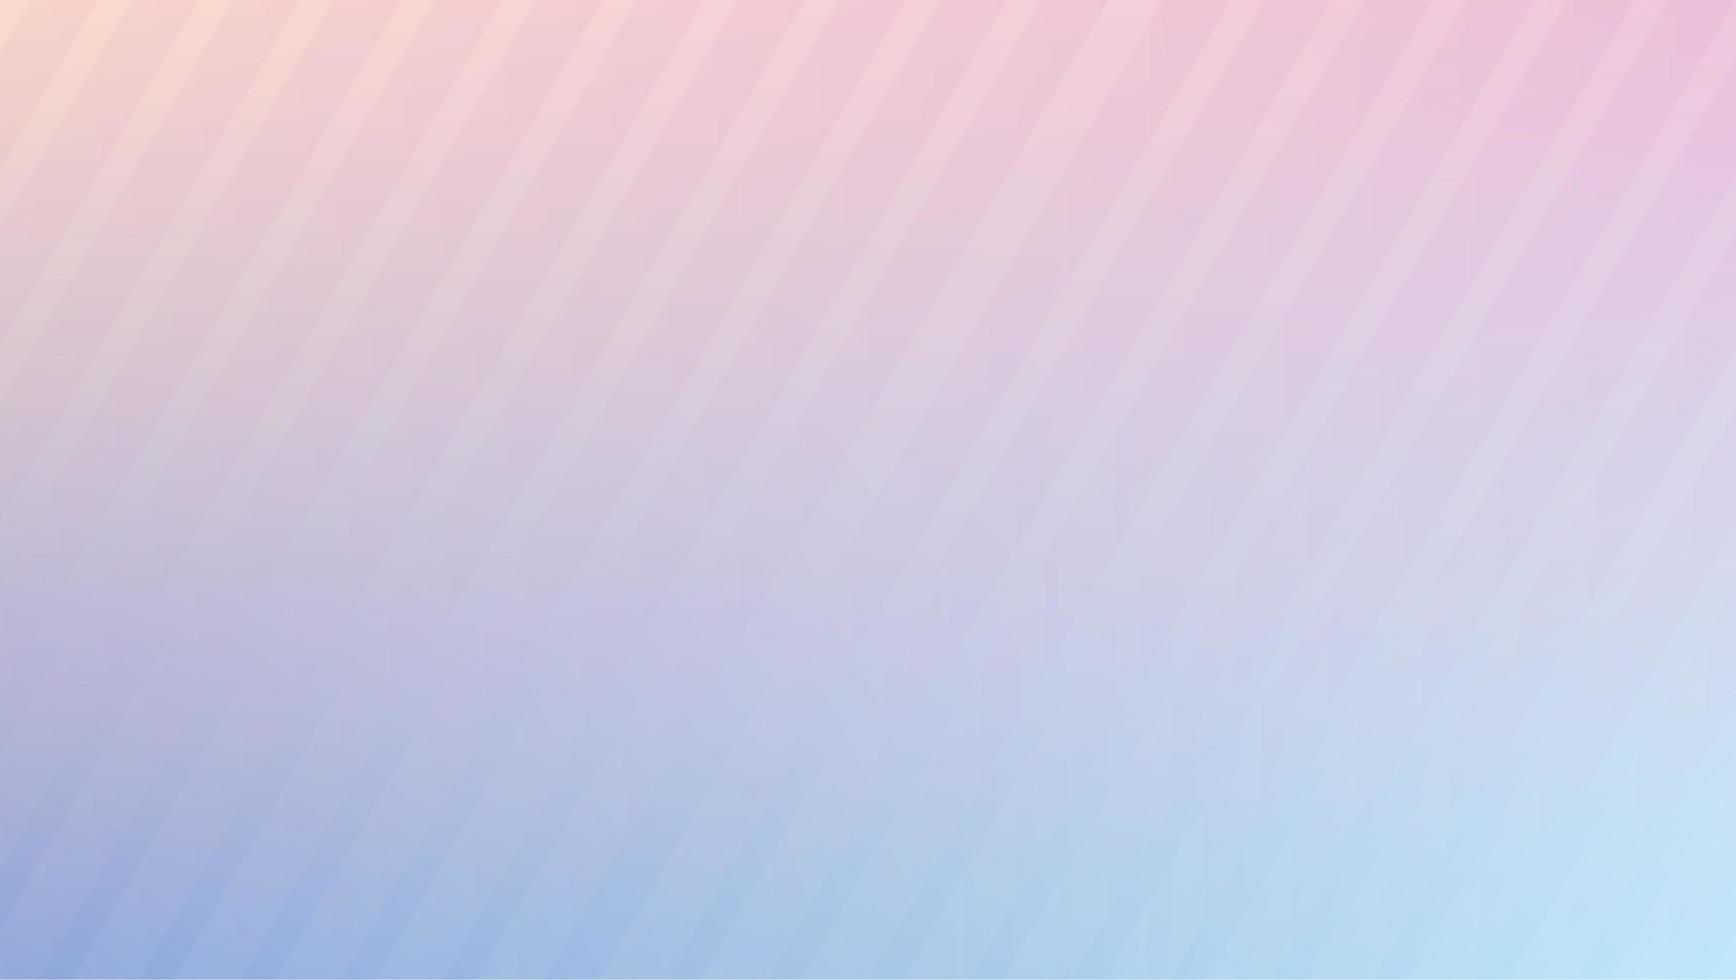 light pink and light blue gradation abstract background image with oblique lines photo